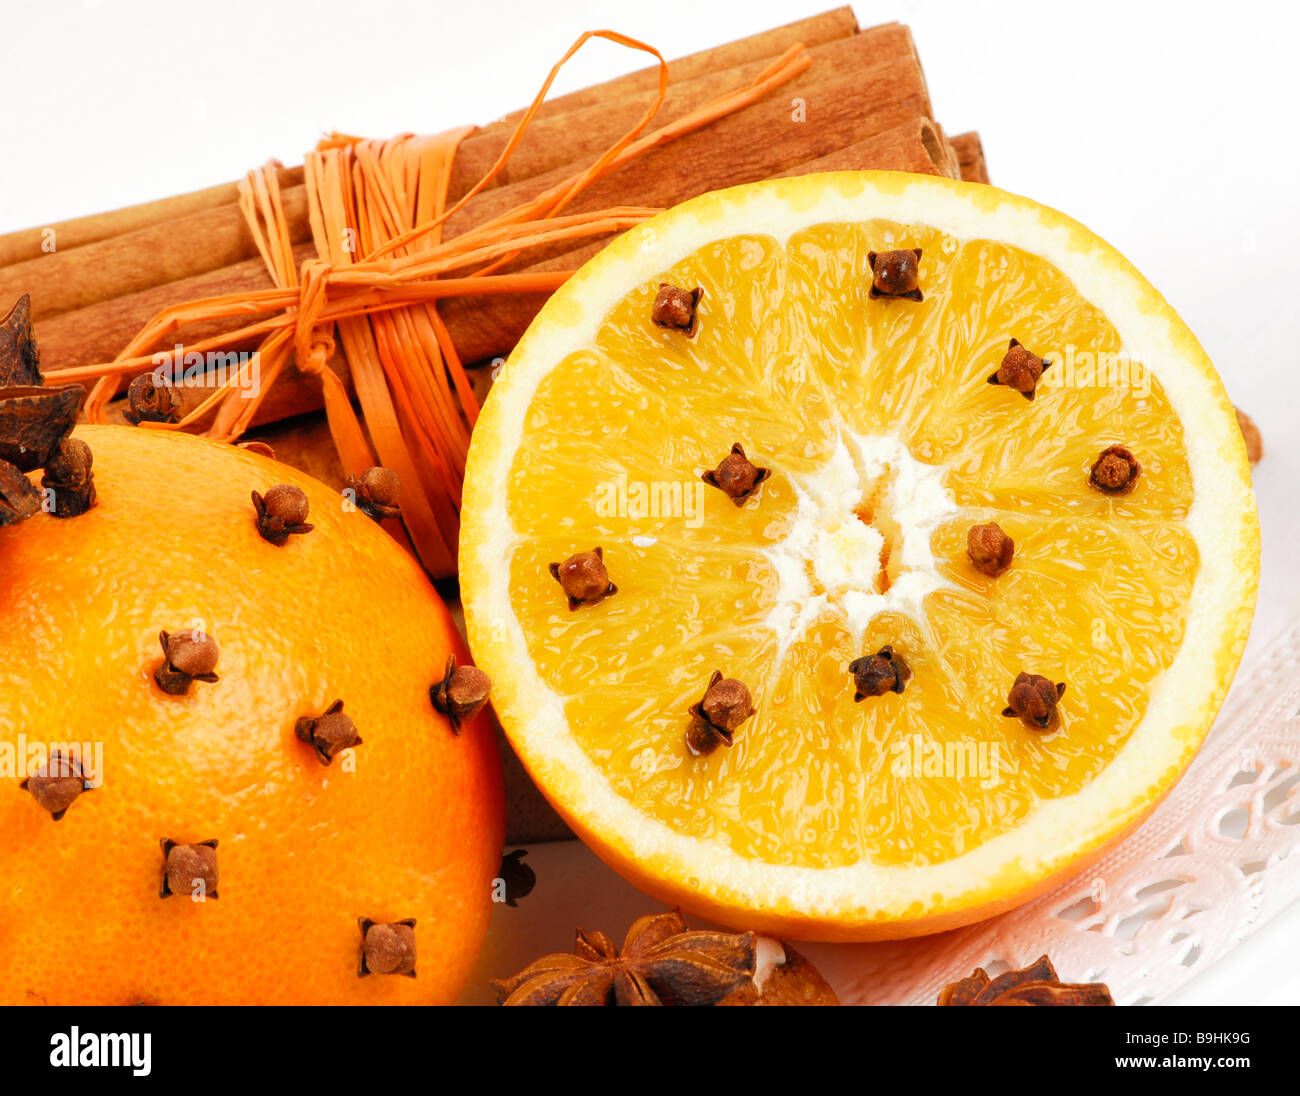 Oranges spiked with cloves, and cinnamon sticks, aroma and decoration Stock Photo